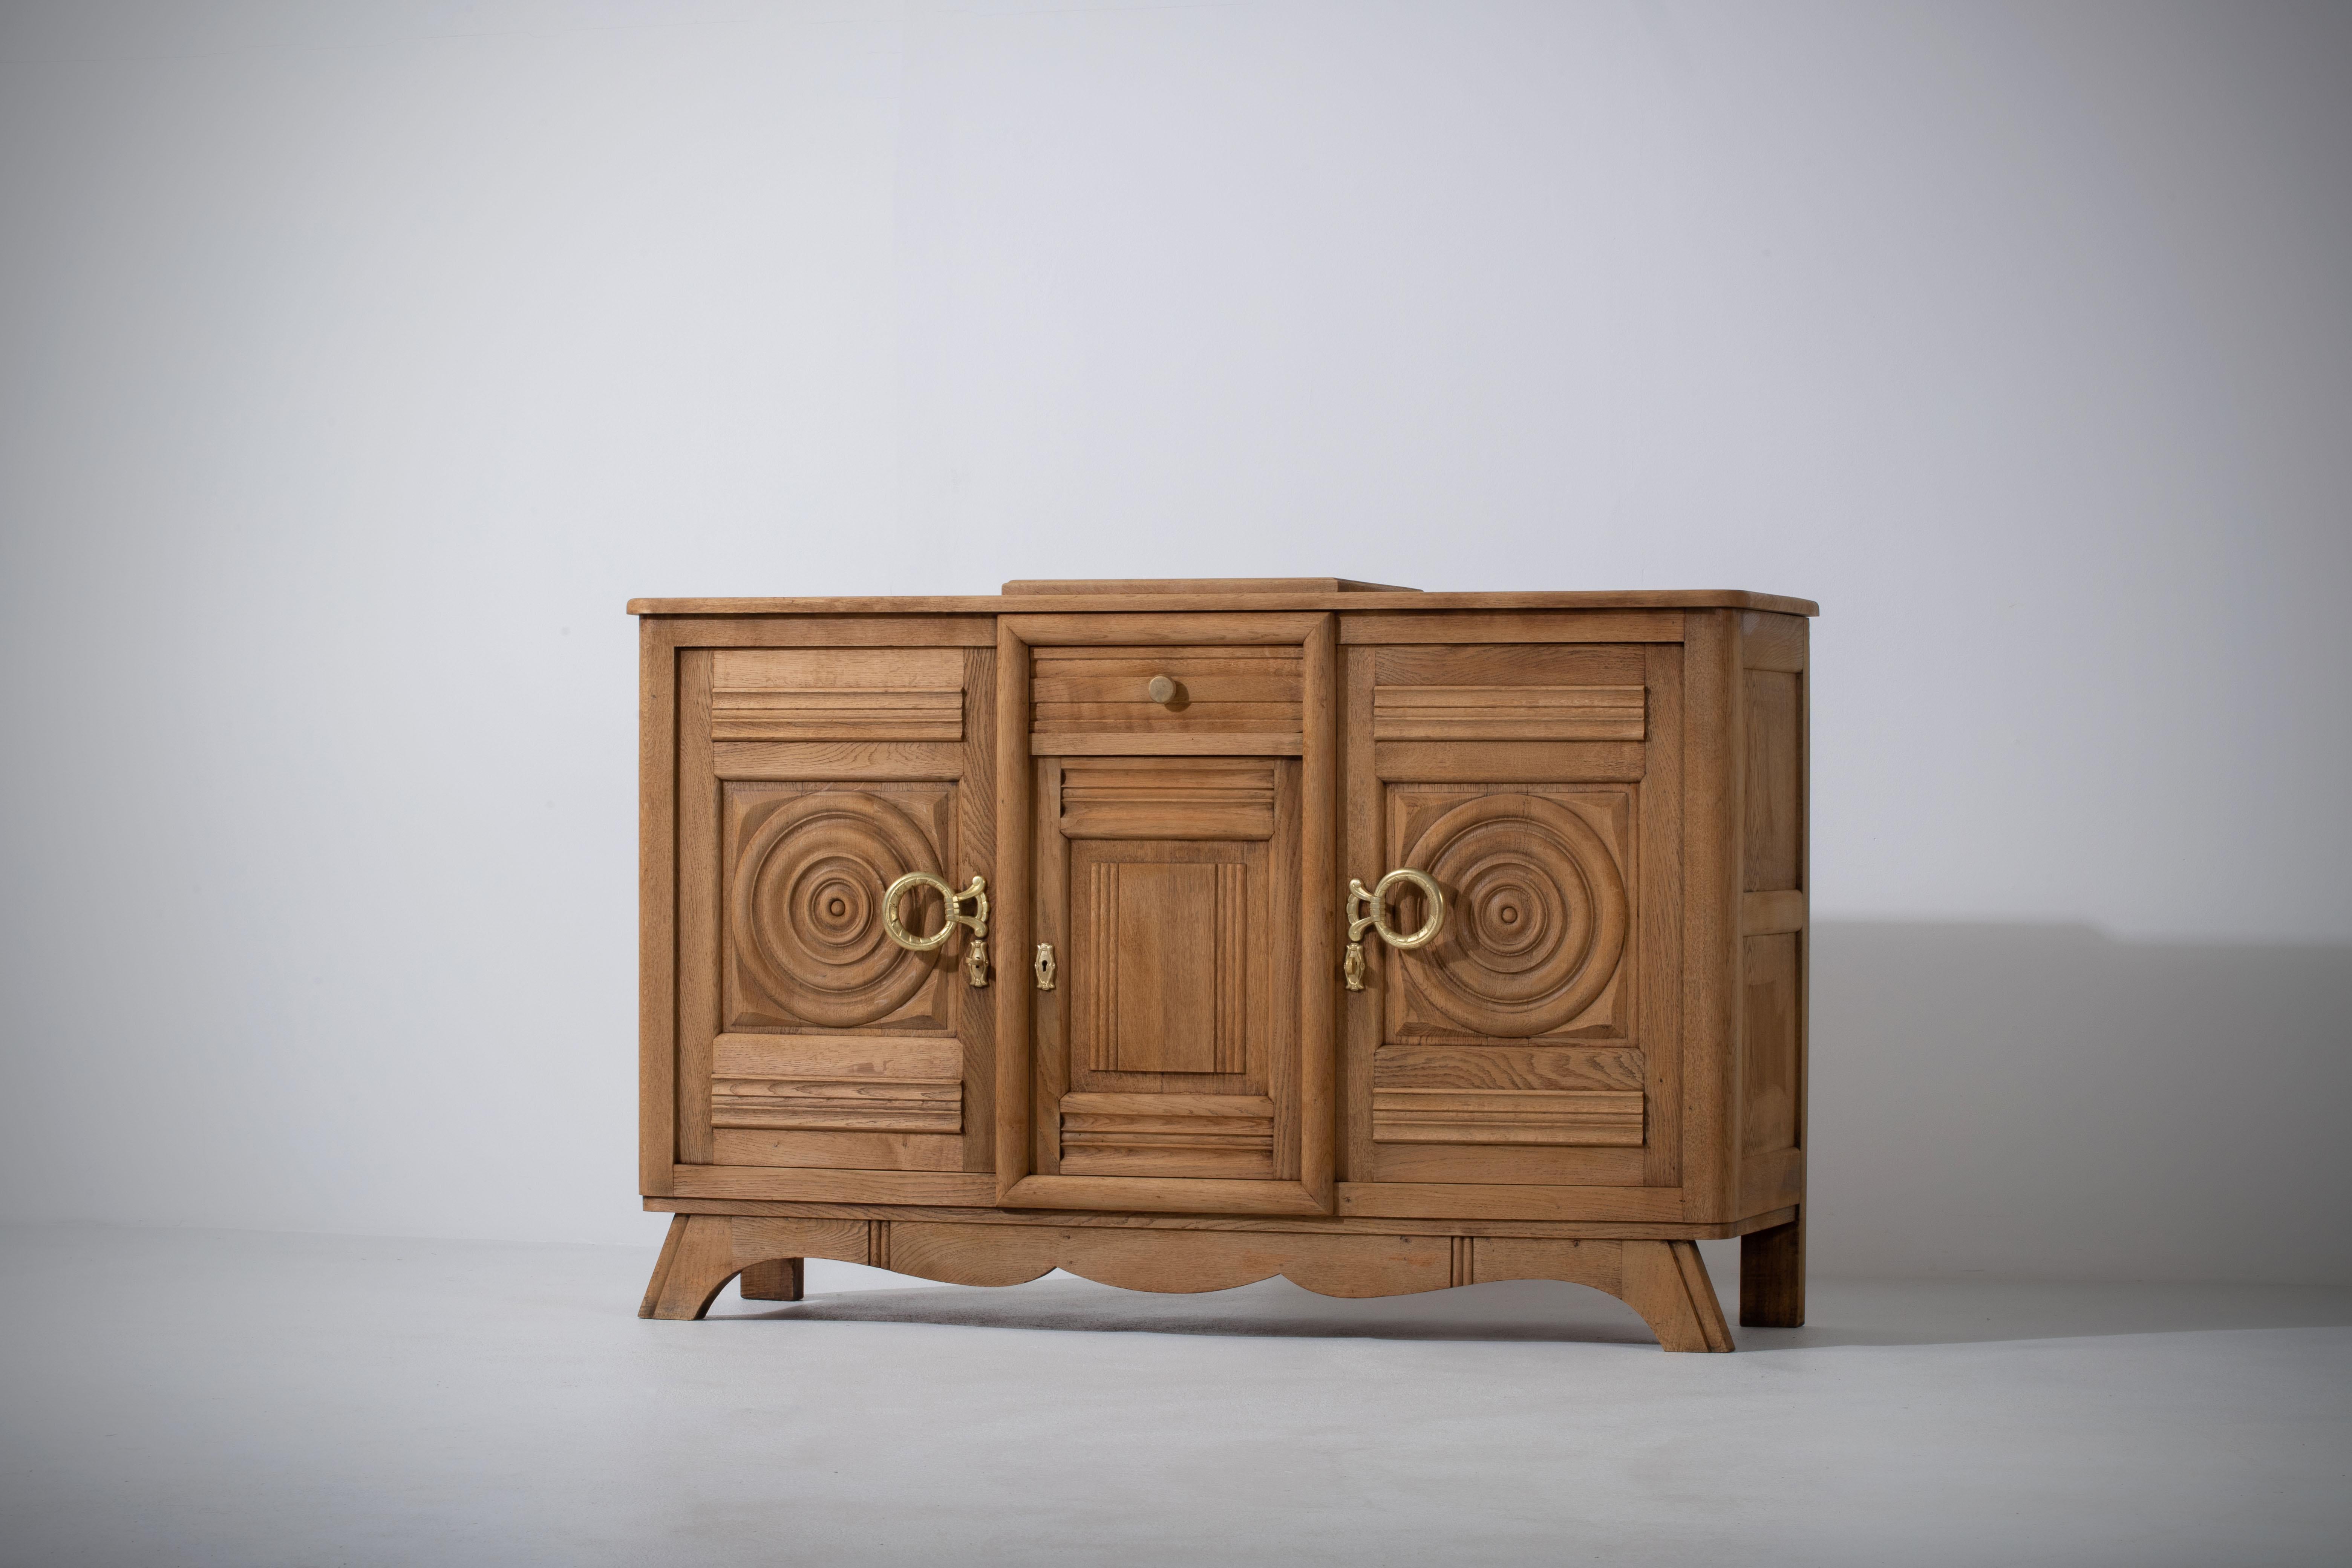 Very elegant credenza in solid oak, France, 1940s.
Art Deco Brutalist sideboard. 
The credenza consists of two storage facilities covered with hand carved designed doors and a drawers and cocktail cabinet.
The refined wooden structures on the